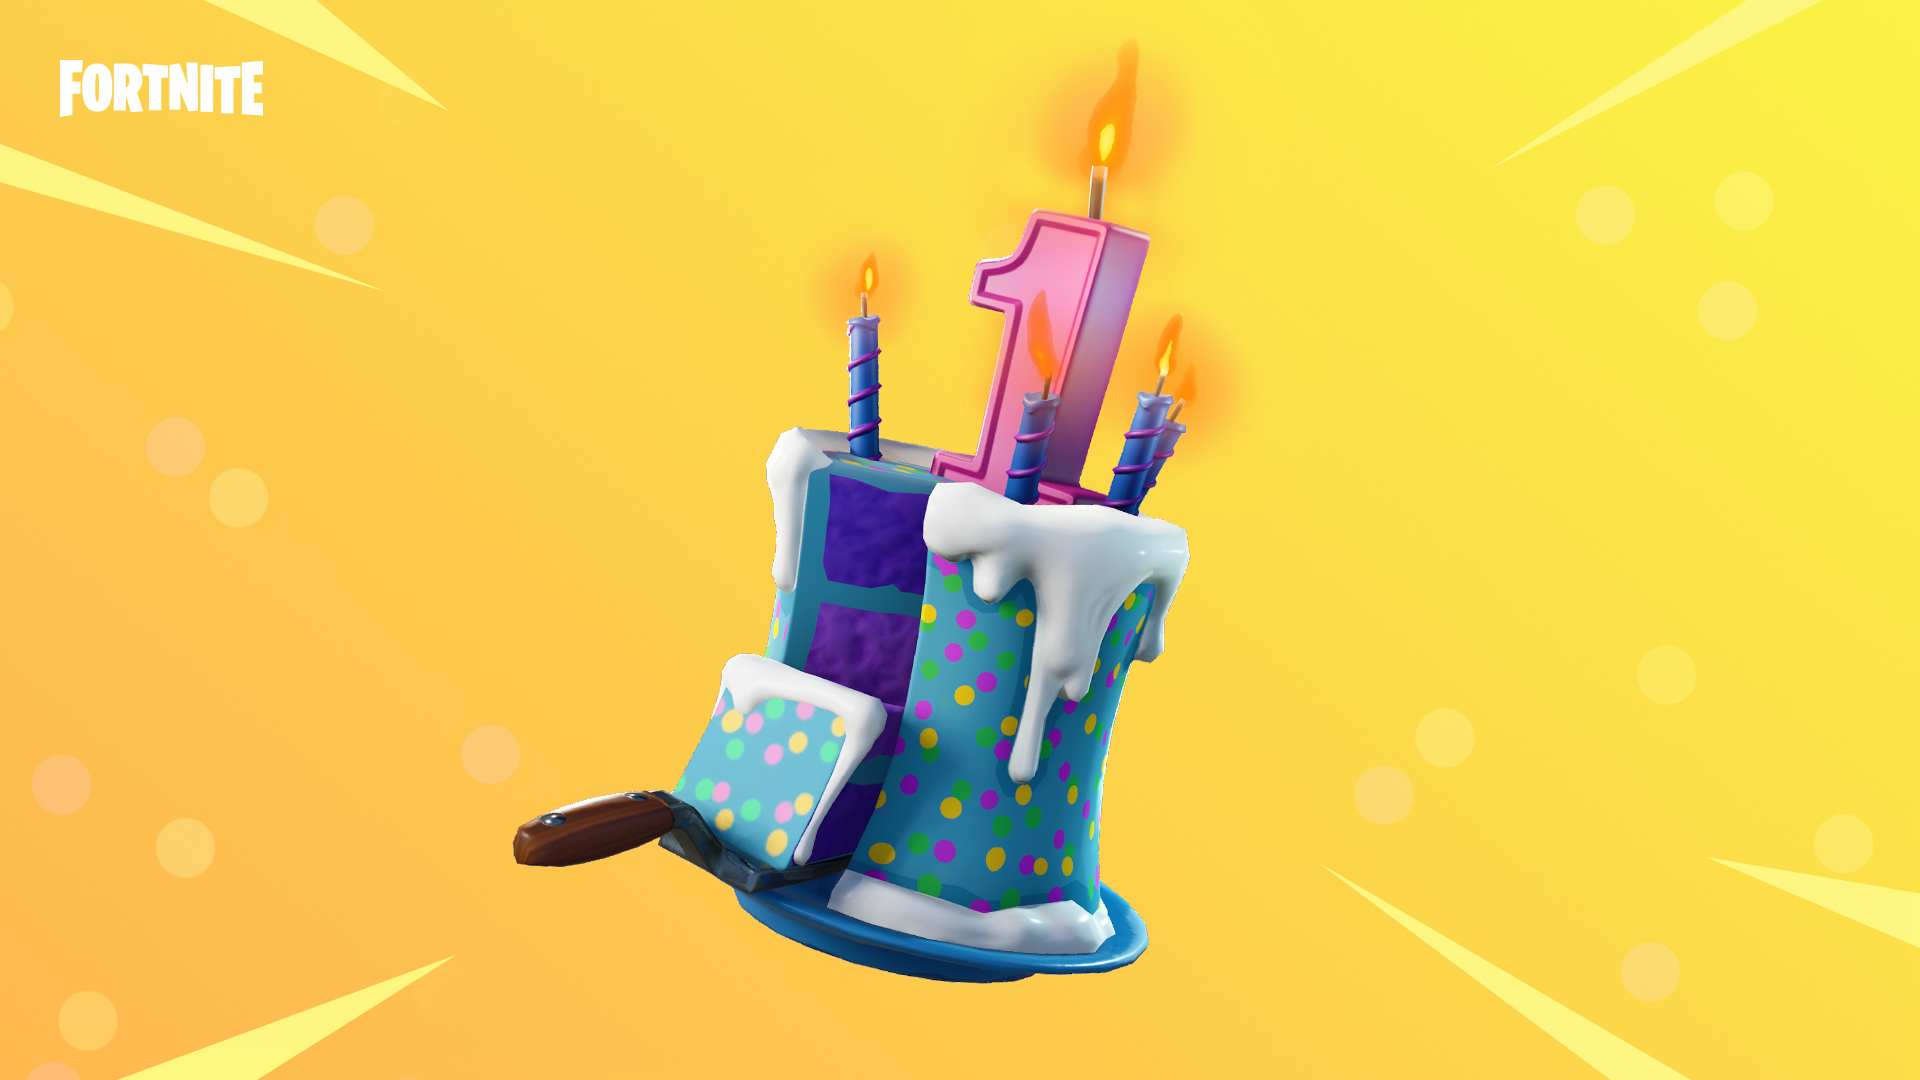 Fortnite Birthday Cake Locations Where To Find Every Cake On The - fortnite birthday cake locations where to find every cake on the map inverse